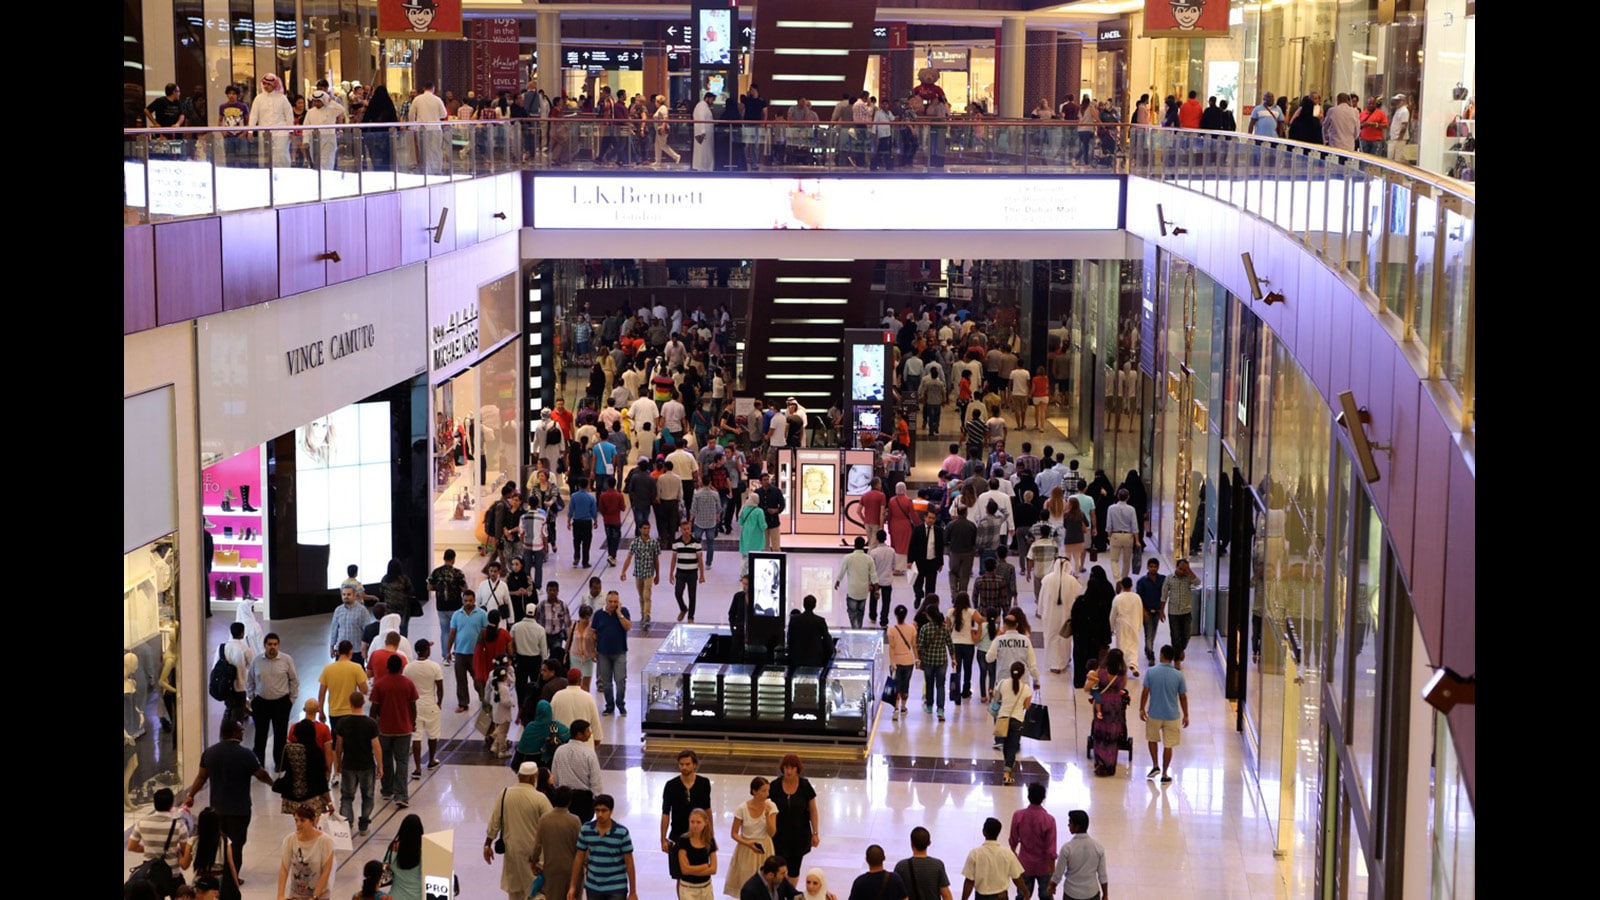 The Dubai Mall Installs More Than 900 Meyer Sound Self-Powered MM-4XP Loudspeakers